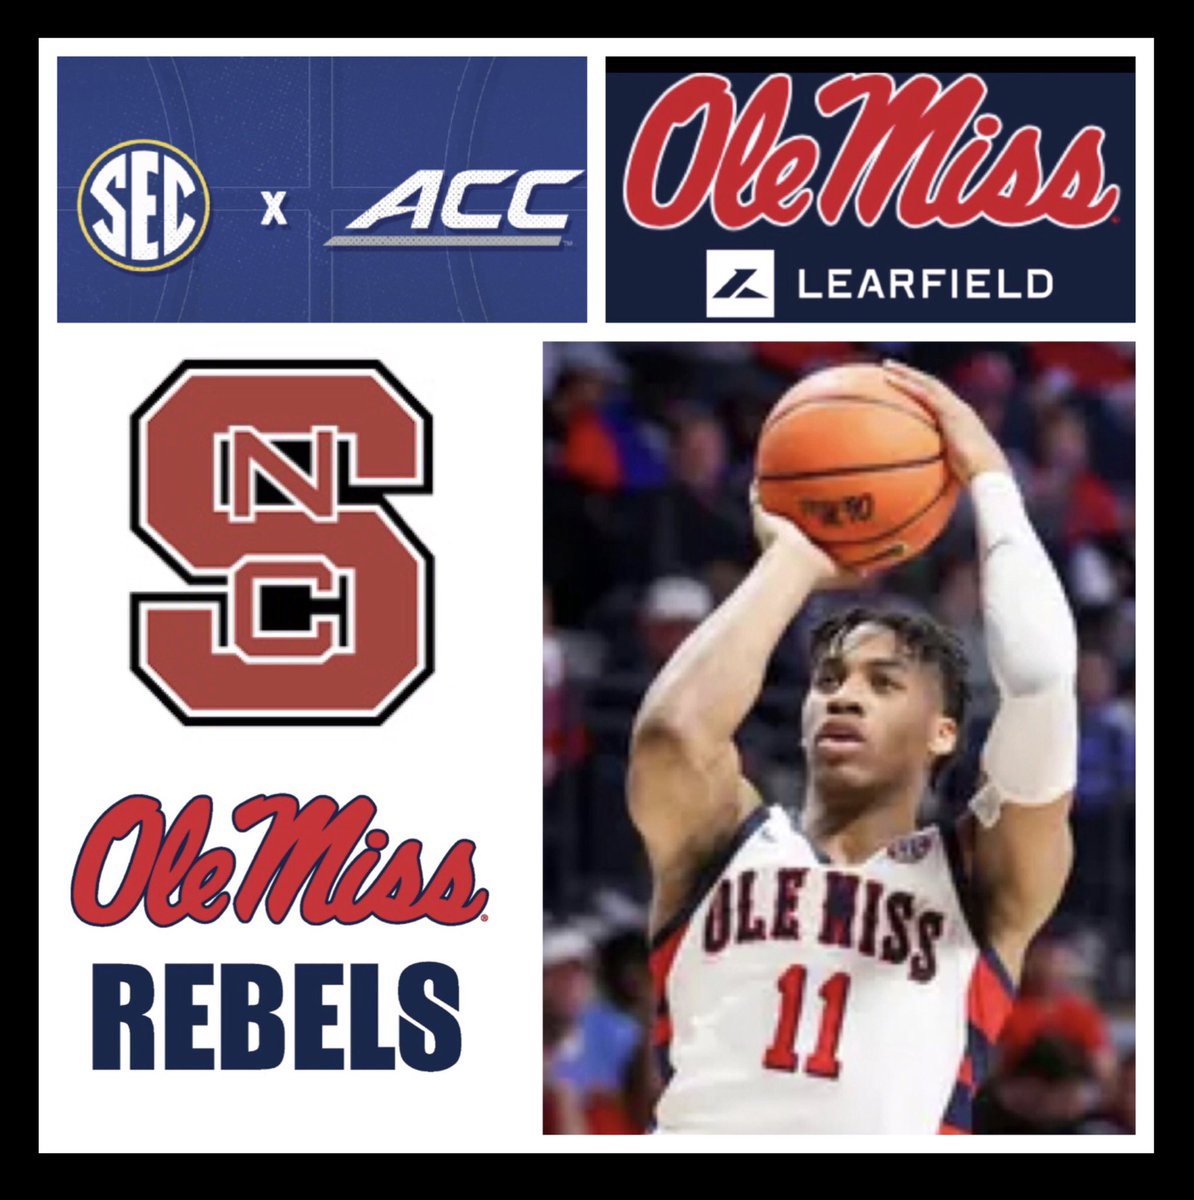 Tonight @OleMissMBB will host NC State in the SEC/ACC Challenge. Tip is 8pm & airtime 7:30pm on the @OleMissNetwork with @RebVoice & @thduker. Listen 🎧 ⬇️ 📻 local station 📱 @OleMissSports app 💻 online olemisssports.com/watch/?Live=88…